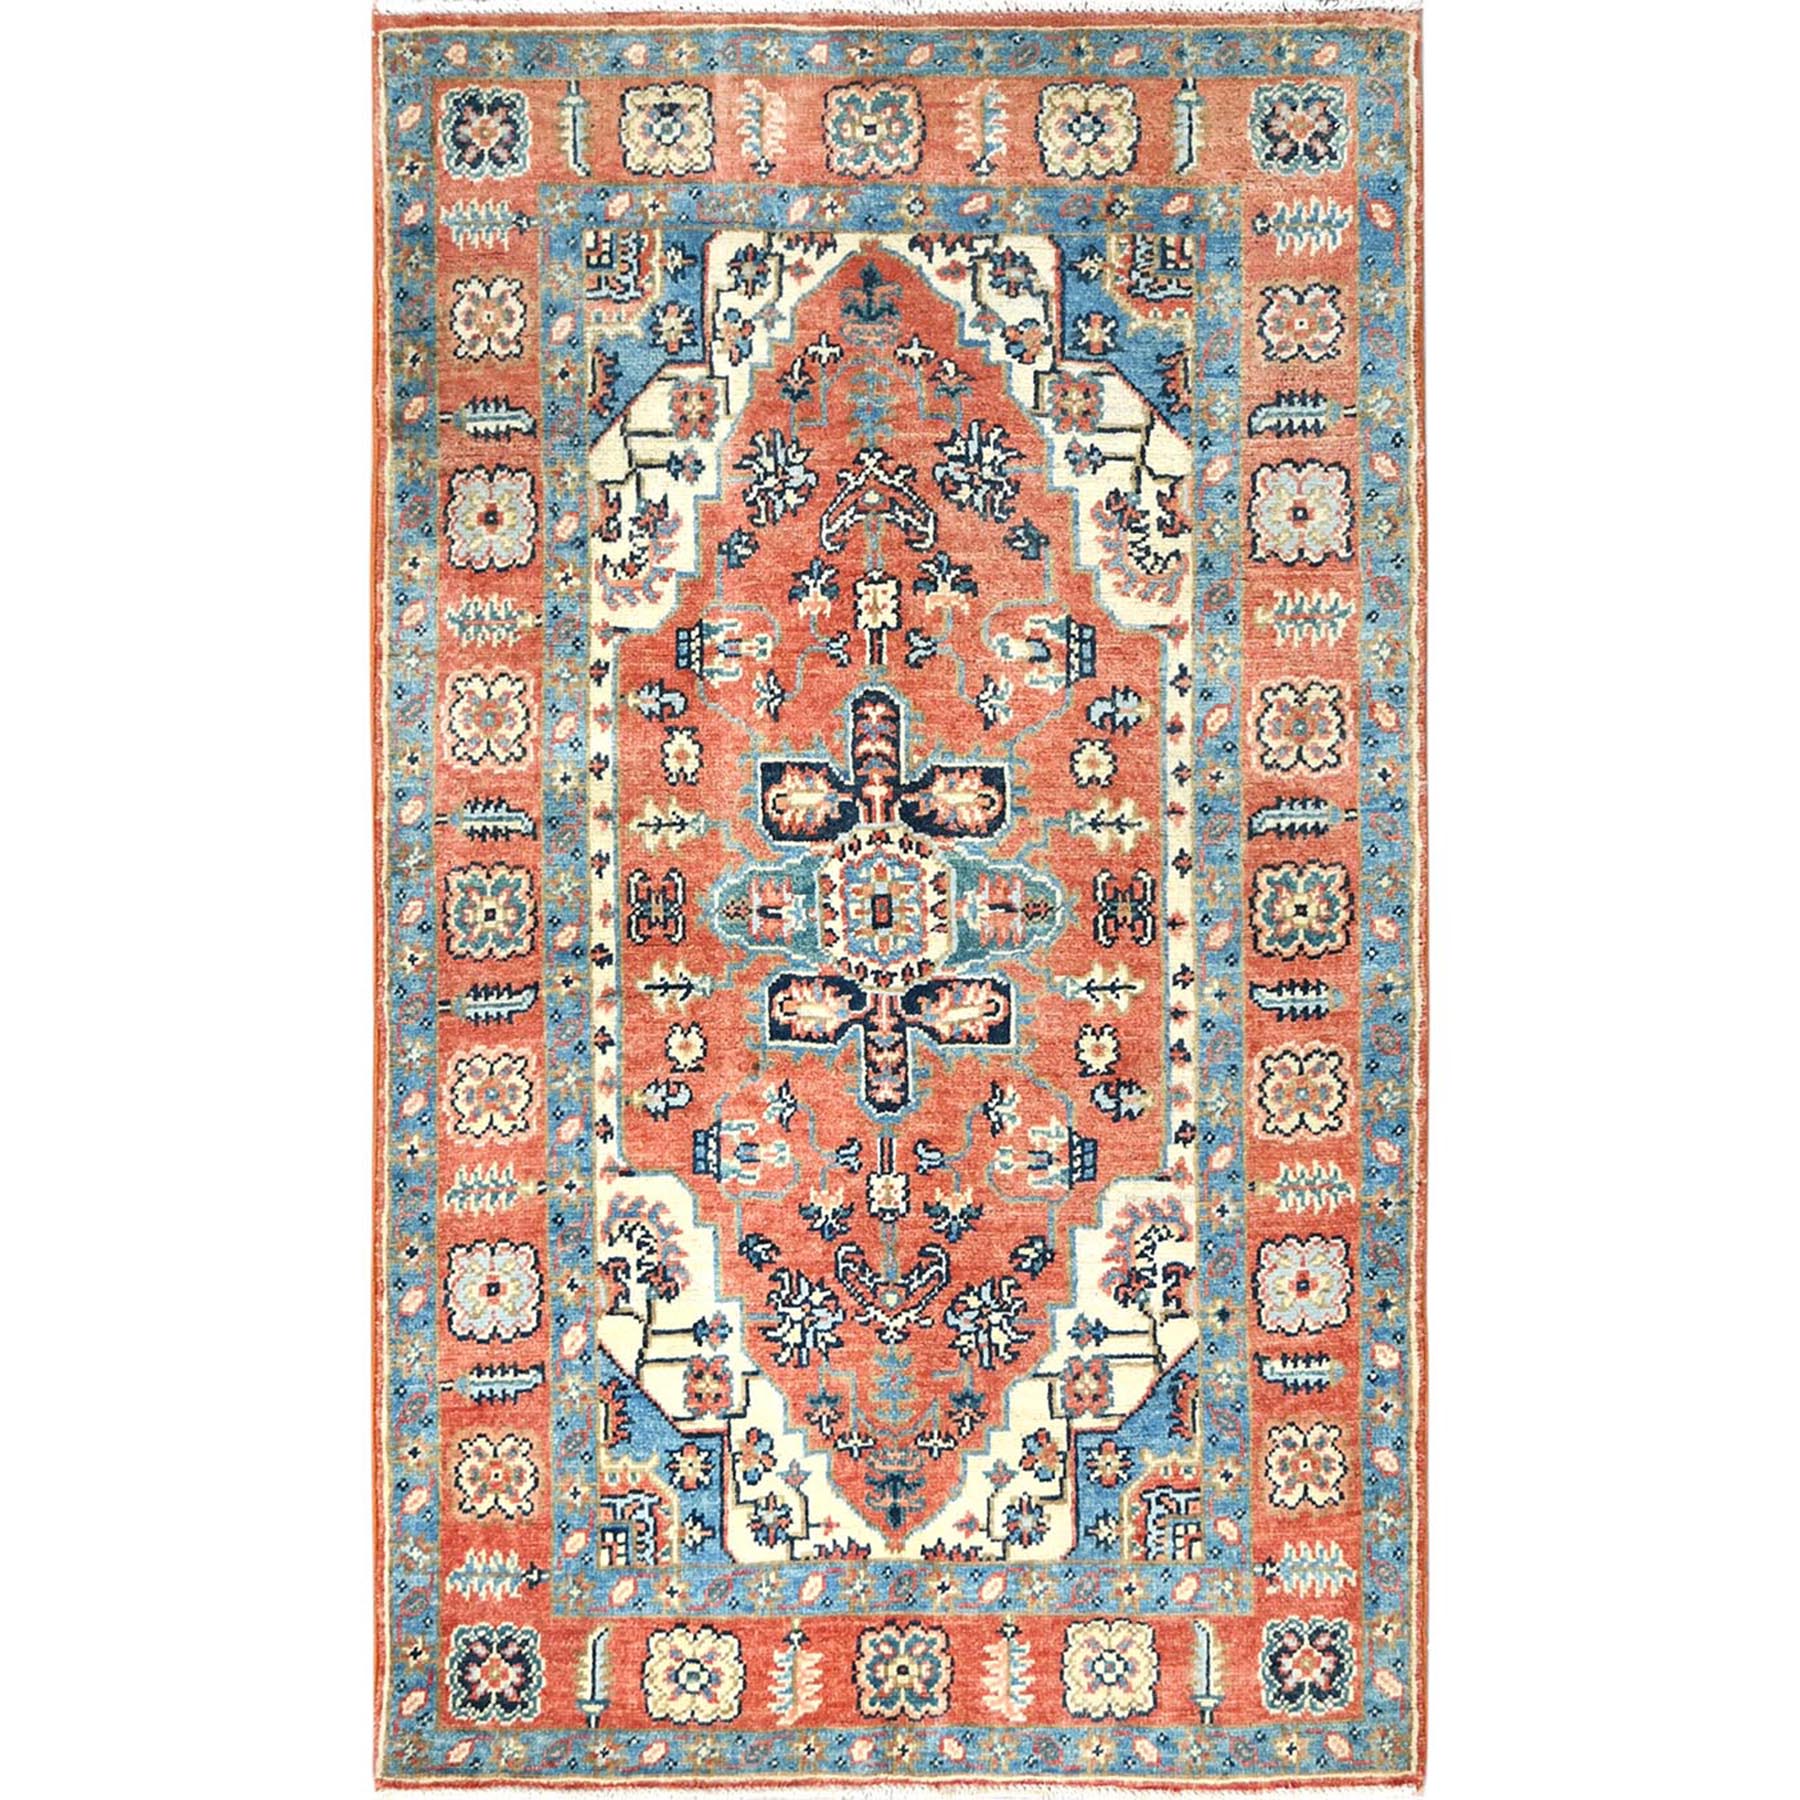  Wool Hand-Knotted Area Rug 2'10